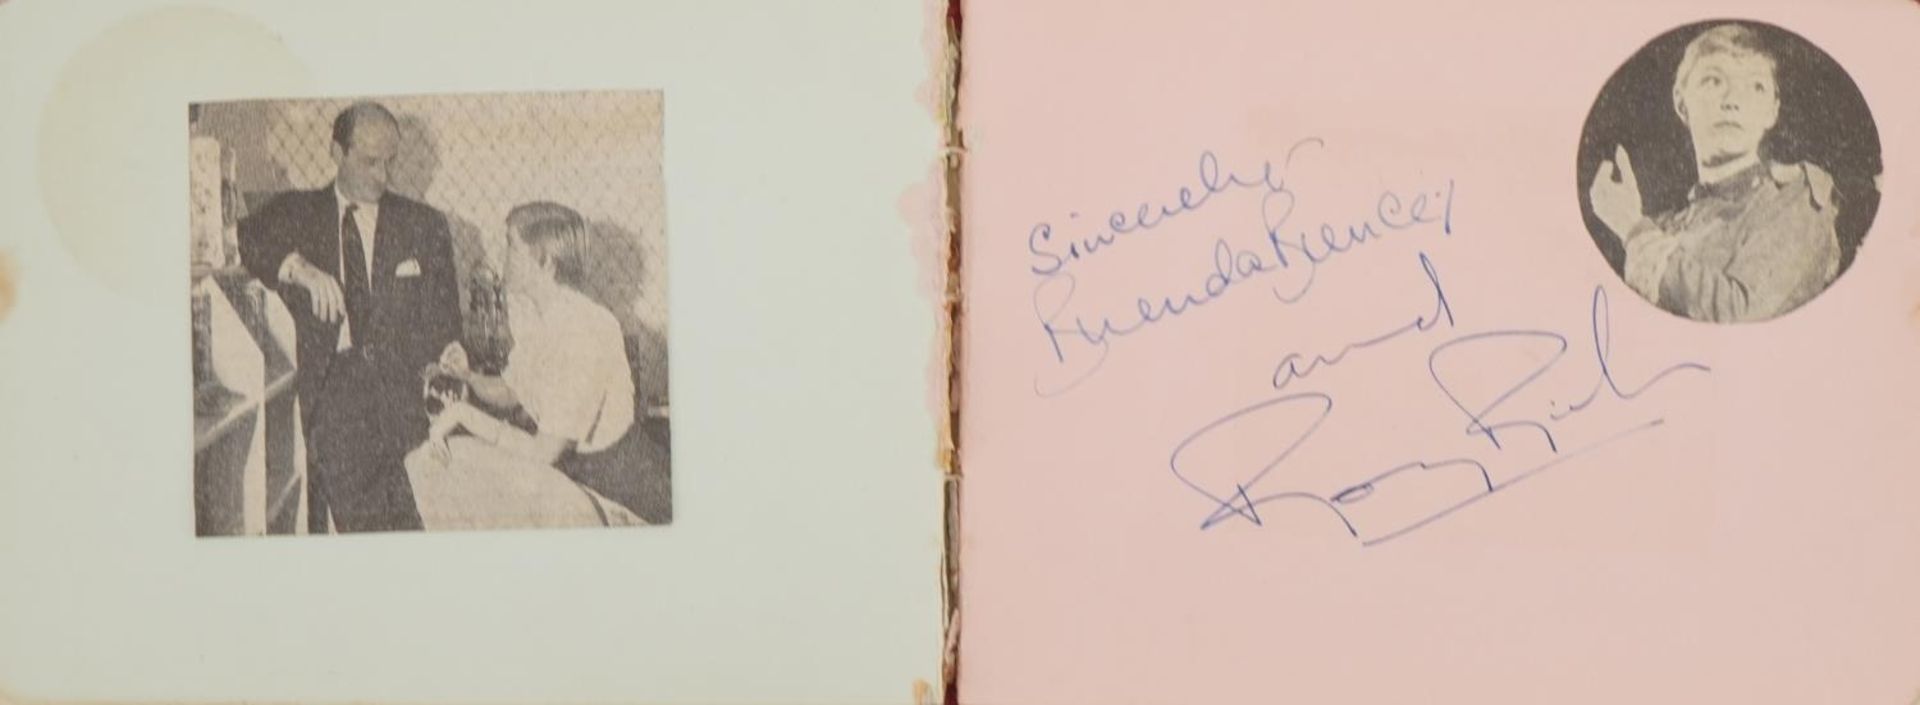 Two early 20th century autograph albums housing various autographs - Image 9 of 13